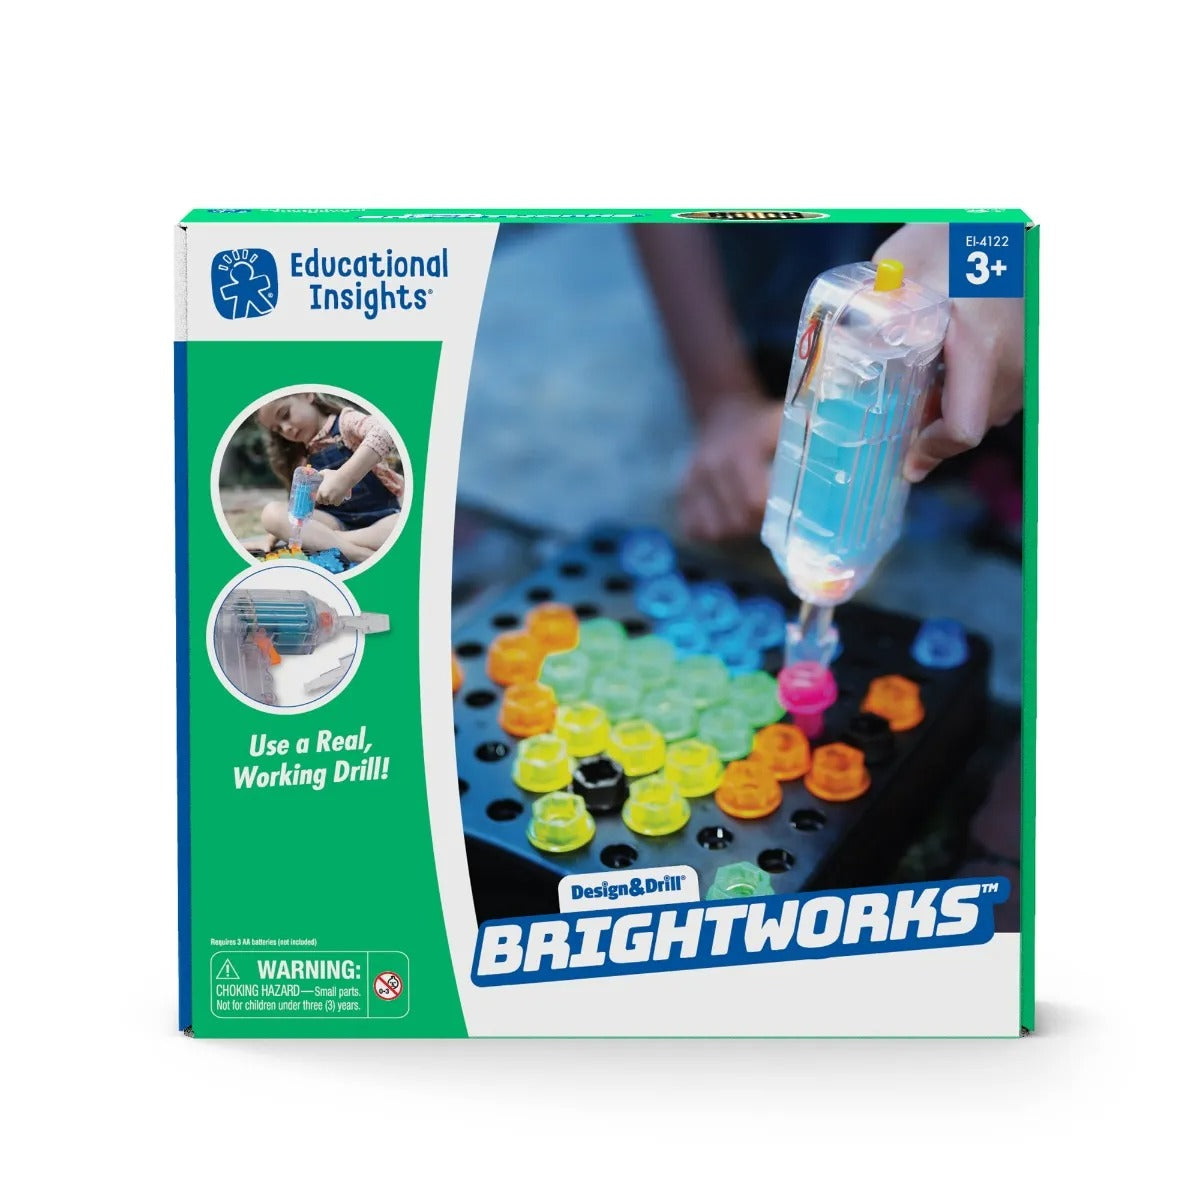 Learning Resources BrightWorks Design & Drill, With Brightworks Design and Drill you can see your designs light up in the dark! It’s so simple to use - just screw in different translucent, coloured bolts into a board of holes using the electric toy drill and they will automatically light up. Create one of your own designs or follow one of the 12 patterns in the full-colour guide, including a television, a boat and a jet plane! The coloured, translucent bolts light up as they are fitted onto the board and th